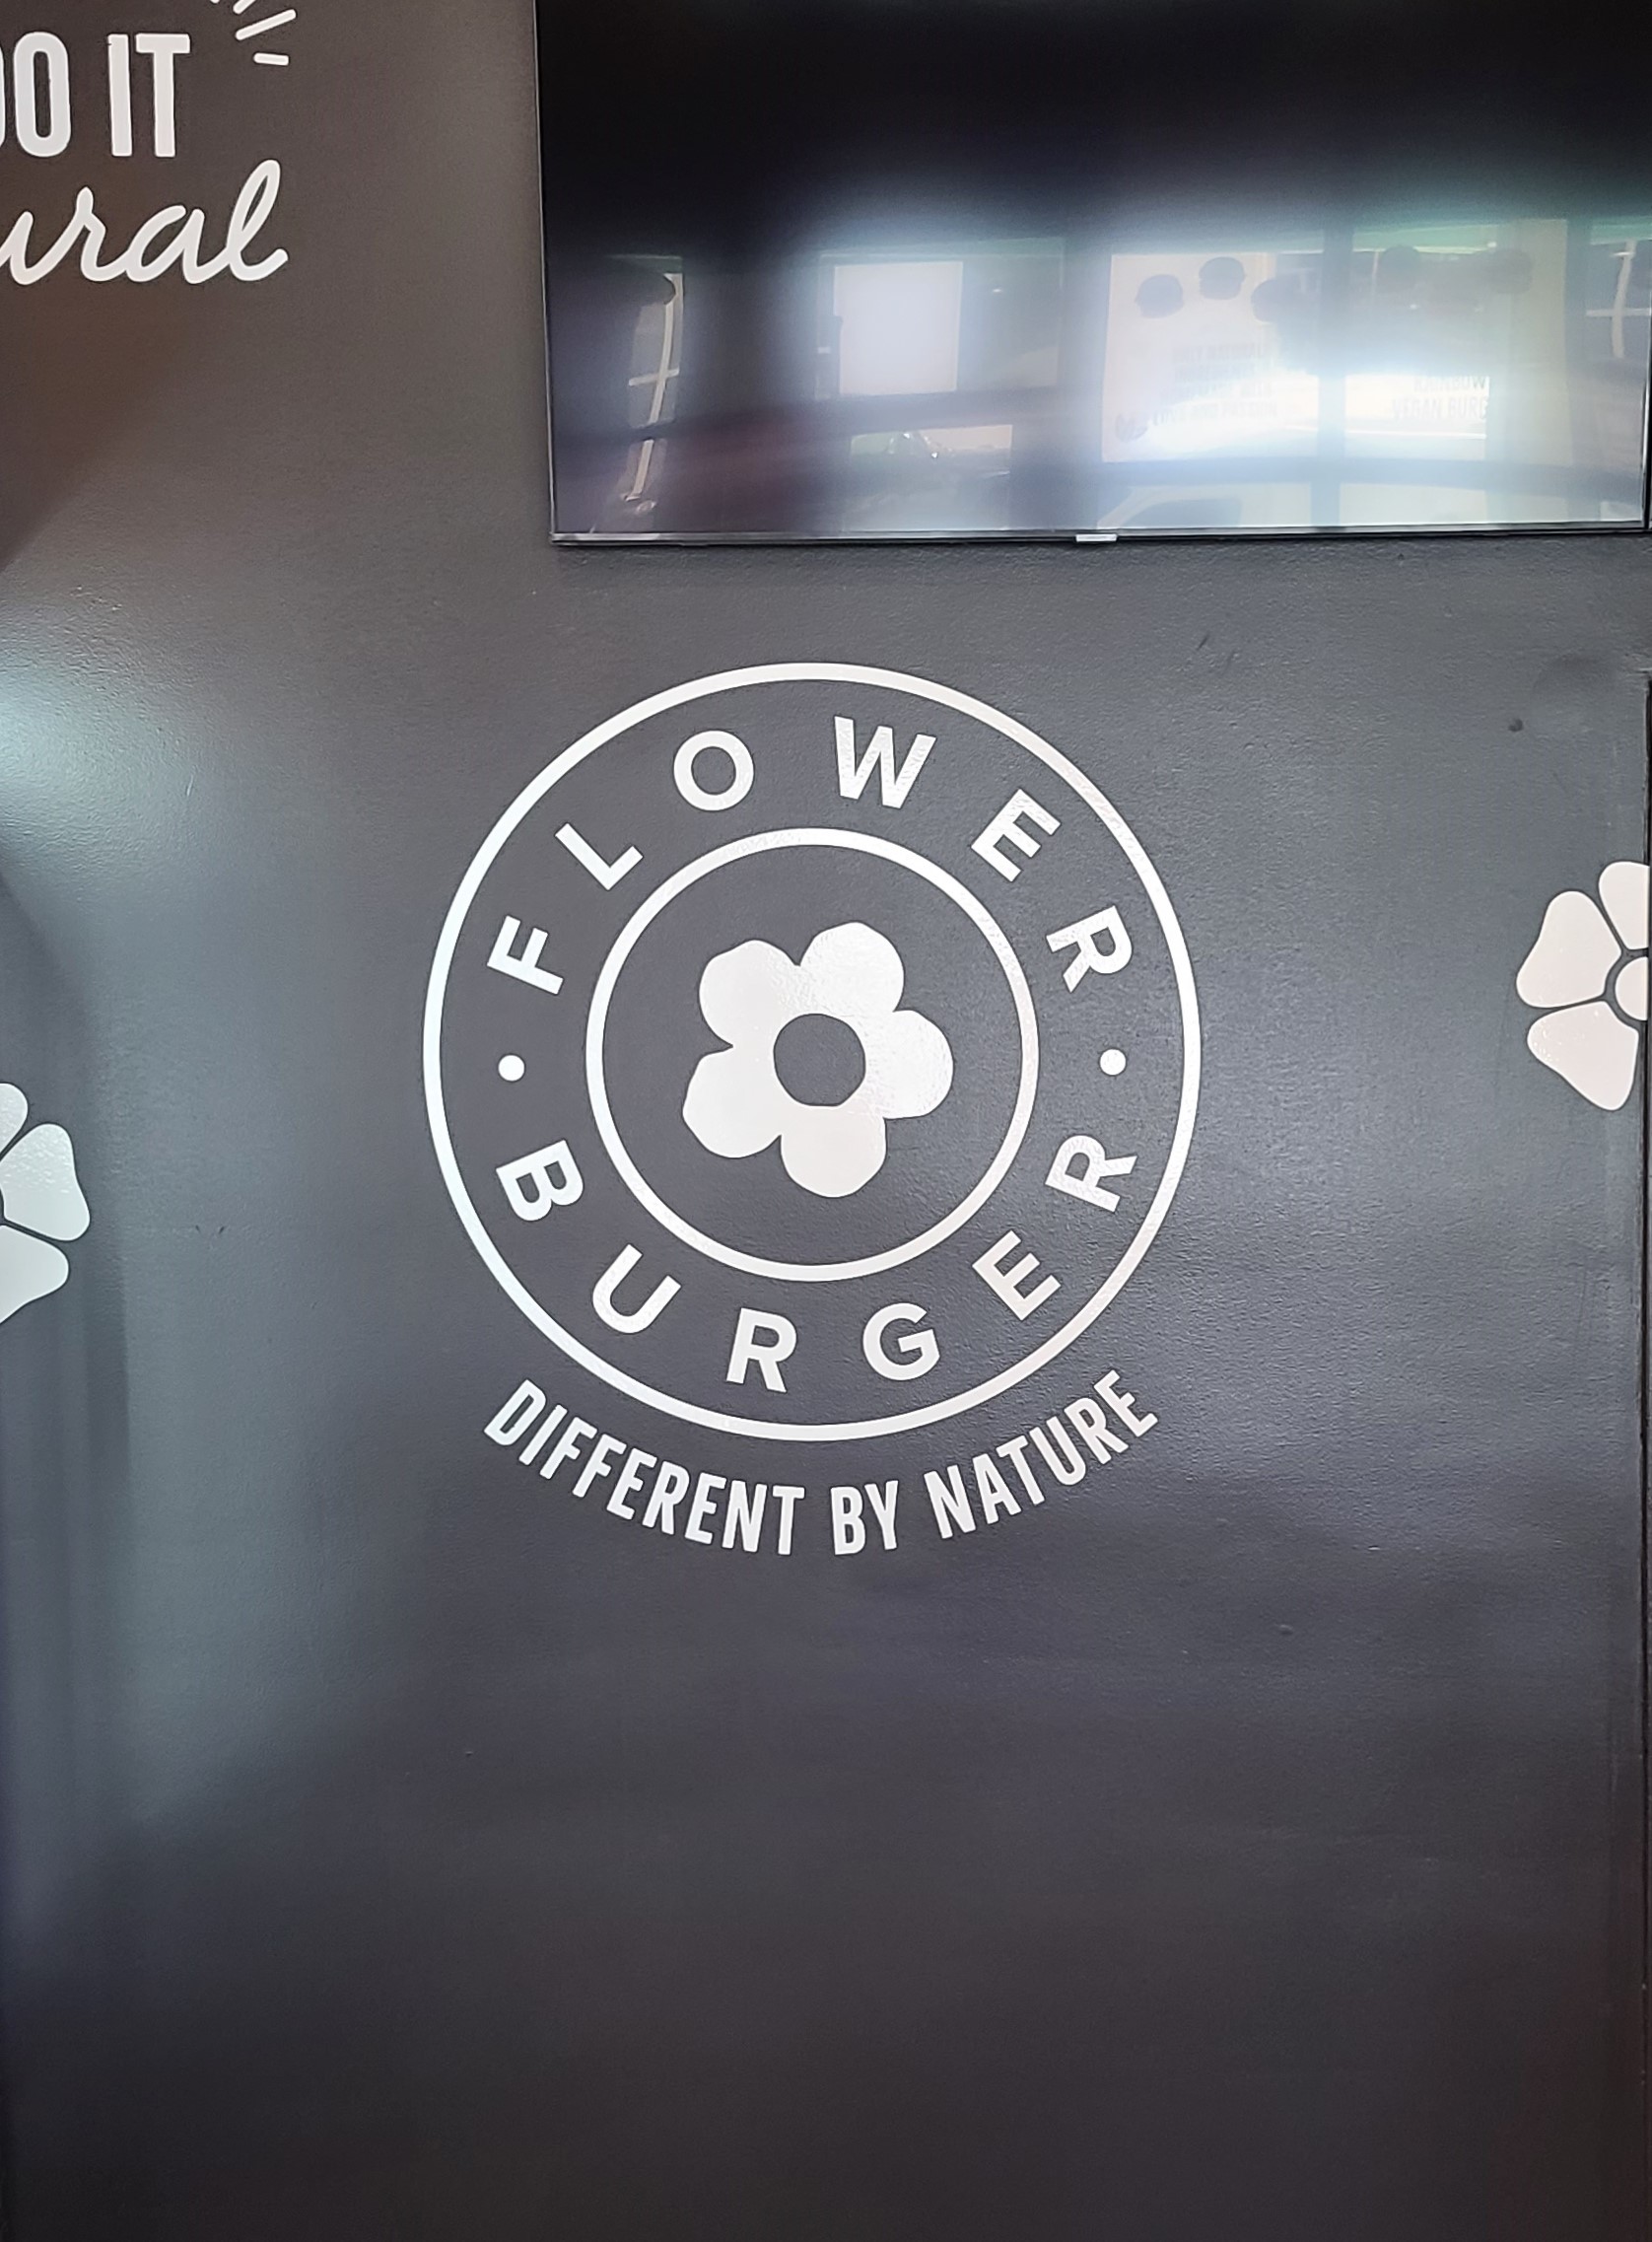 This is a restaurant wall graphics package for Flower Burger. The West Hollywood diner will have more stylish interiors as well as more visible branding.